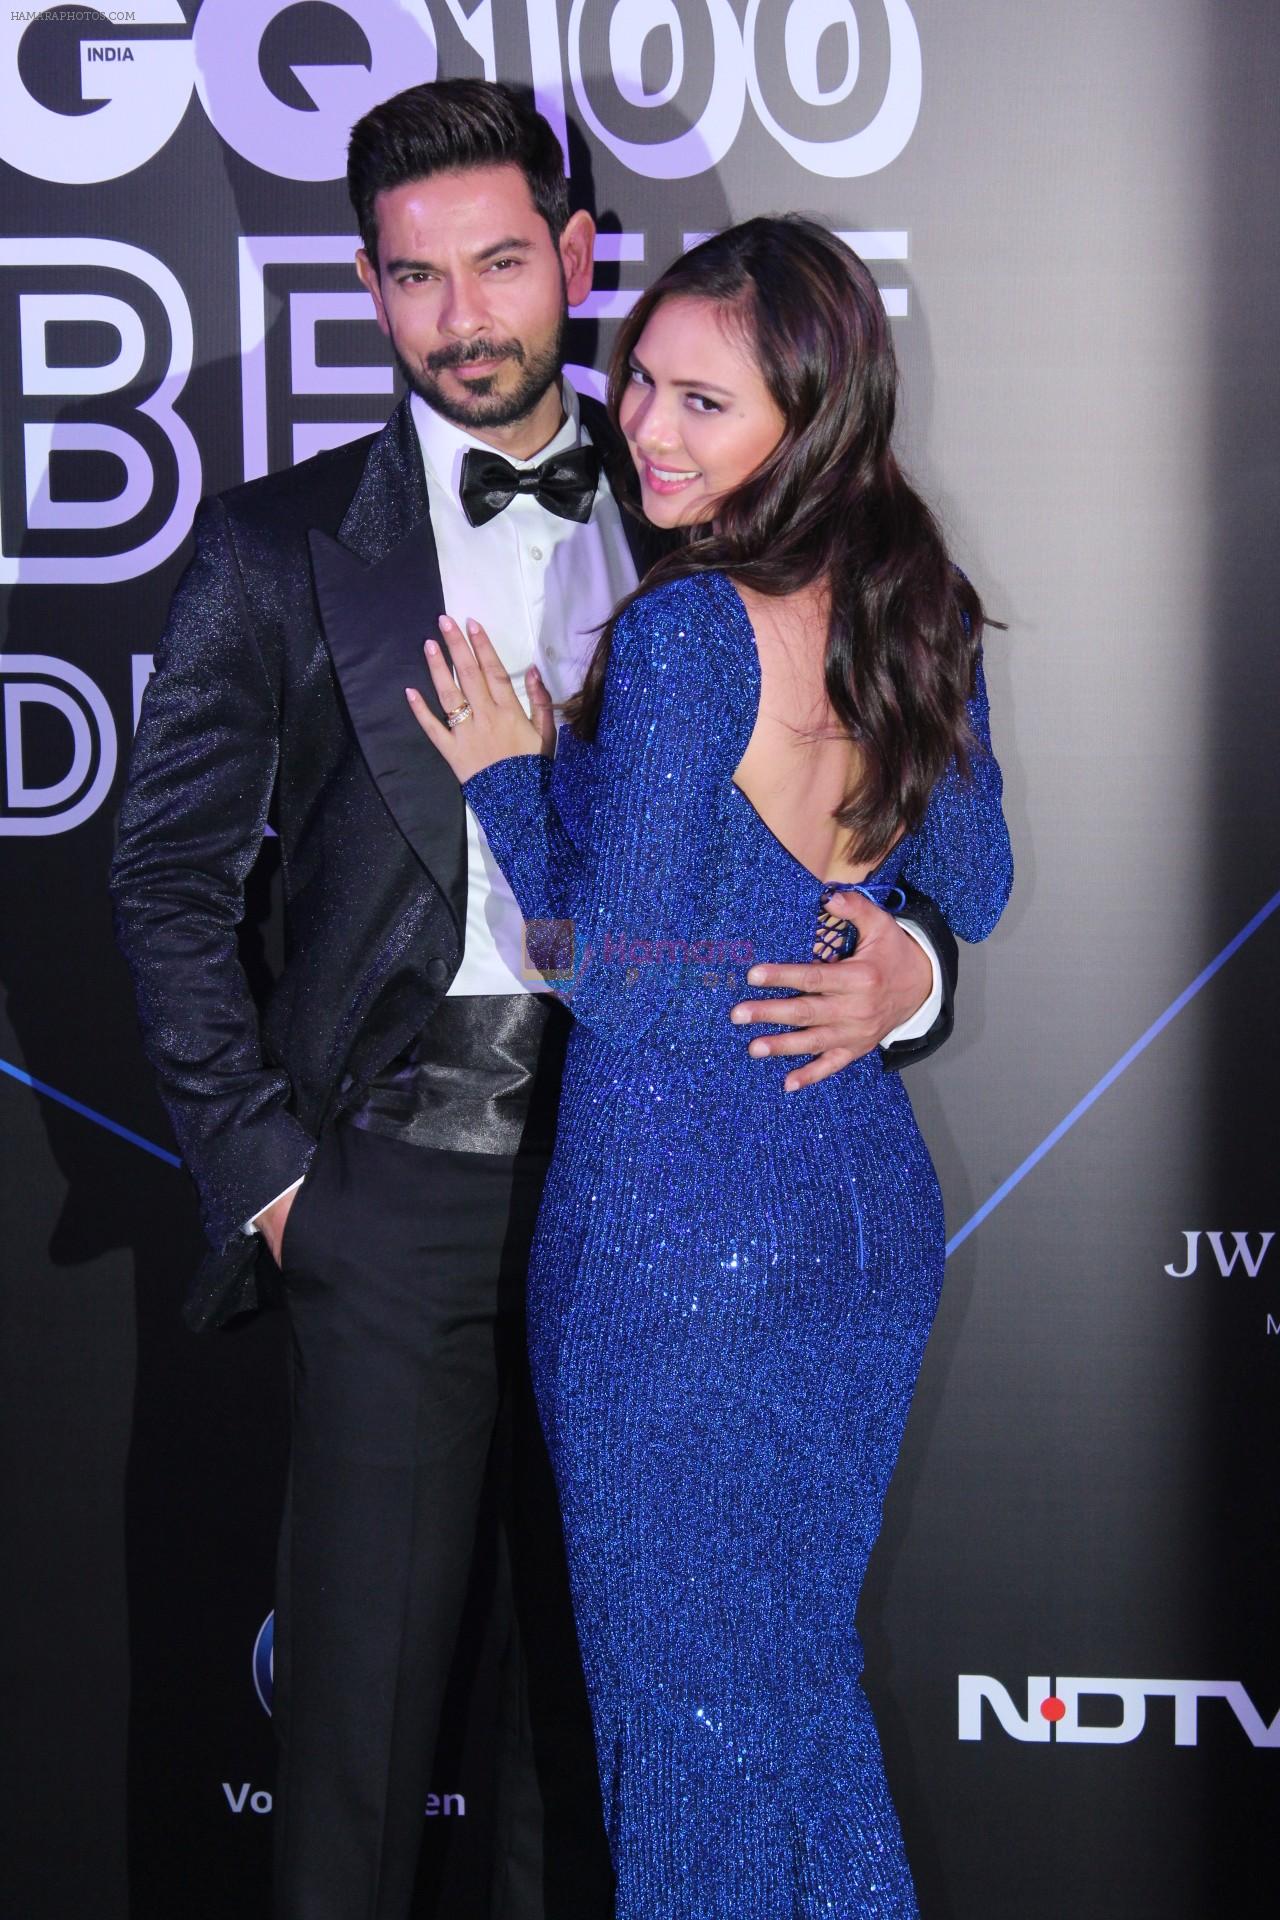 Rochelle Rao at GQ 100 Best Dressed Awards 2019 on 2nd June 2019